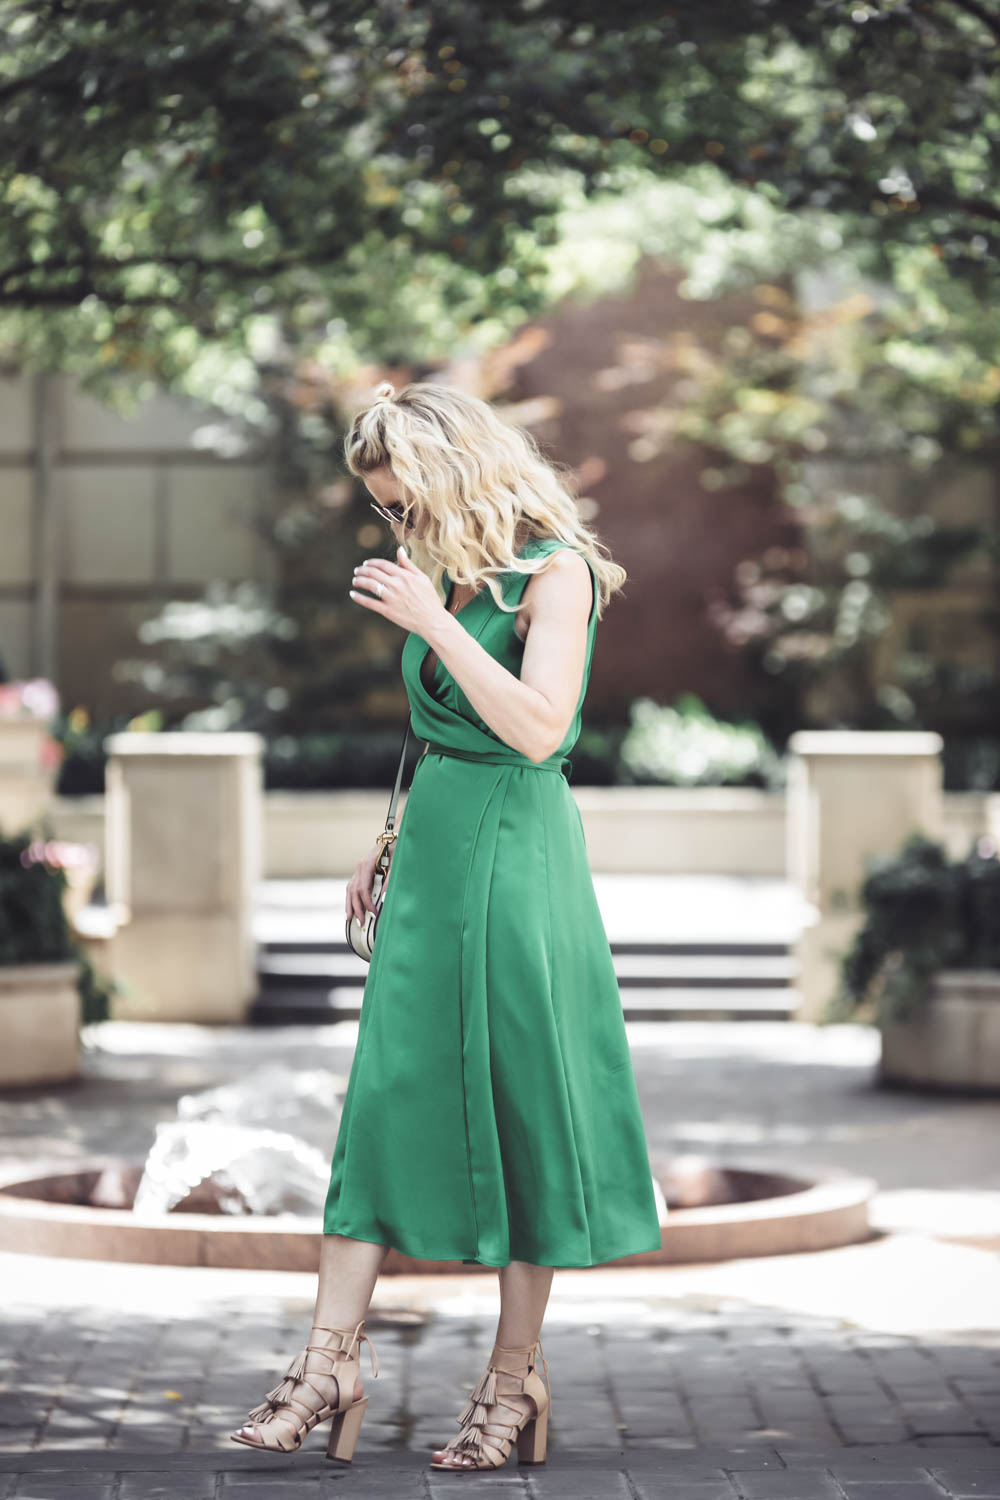 Reward Style Conference 2017 day two //Fashion blogger and fashion youtuber over 40, Erin Busbee of busbeestyle.com from san antonio texas wearing a silky green midi wrap dress from Banana Republic, with the Chloe nile bracelet bag in white, loeffler randall tassel sandals in nude and round sunglasses